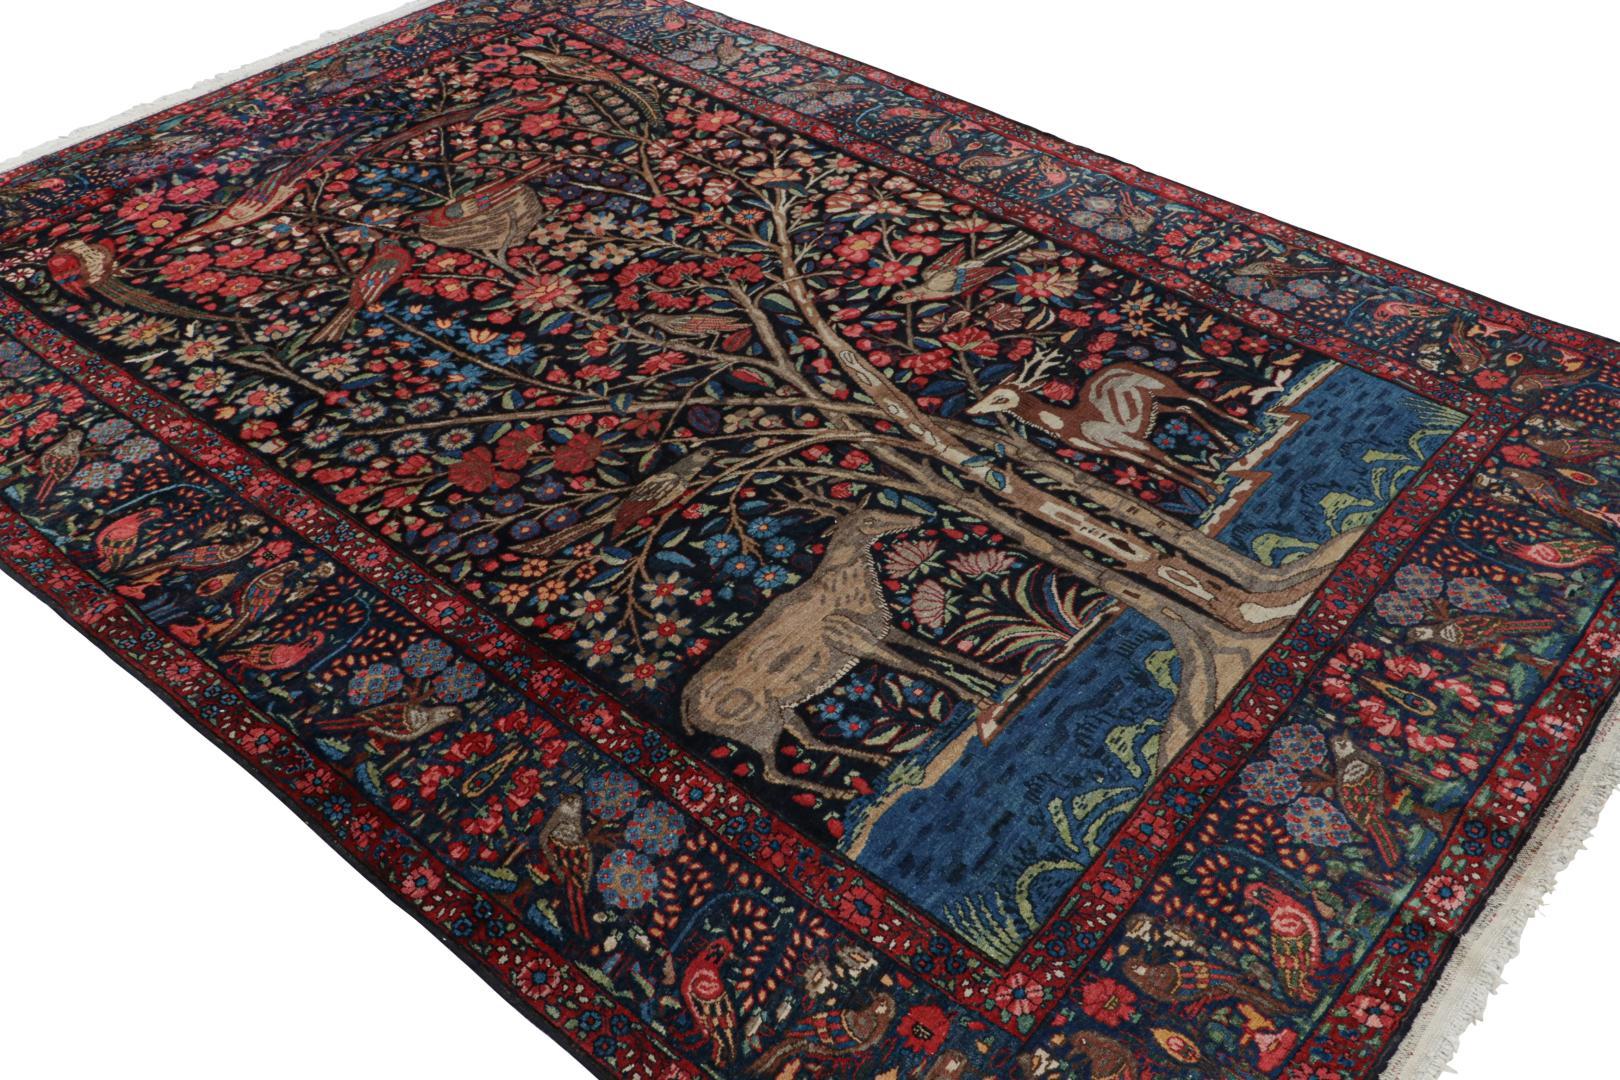 Hand-knotted in wool circa 1920-1930, this 7×11 antique Persian Bakhtiari rug is a rare and exciting new Rug & Kilim curation. 

On the Design:

Admirers of the craft will appreciate this as an extremely collectible piece of folk art for its